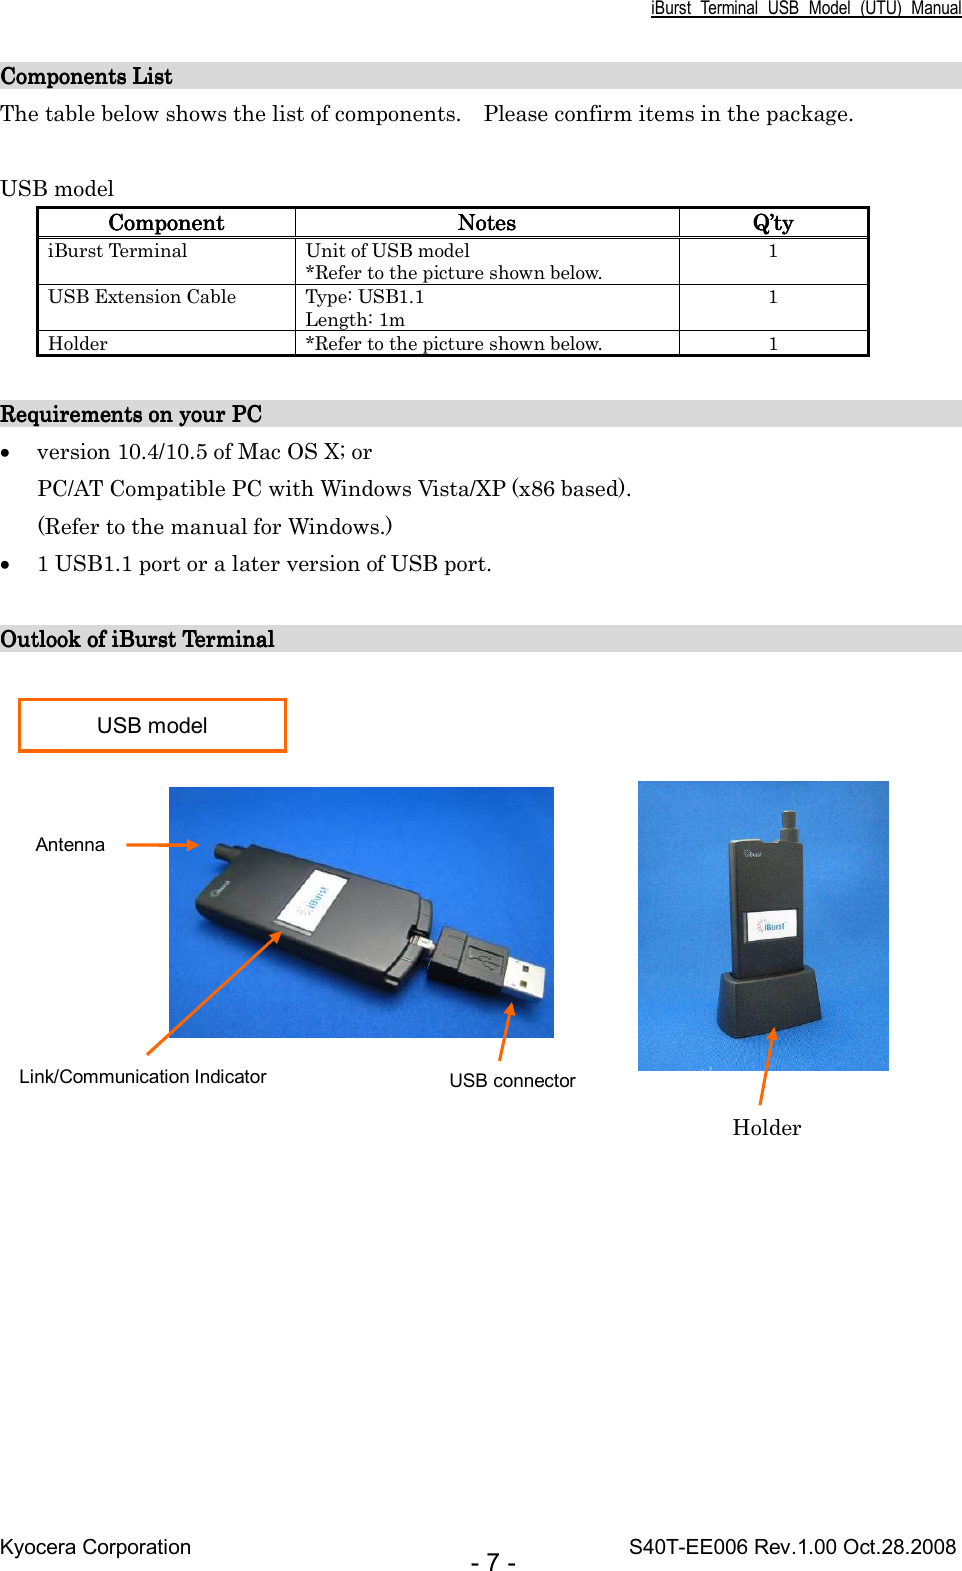 iBurst  Terminal  USB  Model  (UTU)  Manual Kyocera Corporation                                                                                    S40T-EE006 Rev.1.00 Oct.28.2008 - 7 - Components List             Components List             Components List             Components List                                                                                                                                                                                                                                                                                               The table below shows the list of components.    Please confirm items in the package.  USB model ComponentComponentComponentComponent     NotesNotesNotesNotes     Q’Q’Q’Q’tytytyty    iBurst Terminal  Unit of USB model *Refer to the picture shown below. 1 USB Extension Cable  Type: USB1.1 Length: 1m 1 Holder  *Refer to the picture shown below.  1  Requirements on your PC                                                                   Requirements on your PC                                                                   Requirements on your PC                                                                   Requirements on your PC                                                                            • version 10.4/10.5 of Mac OS X; or PC/AT Compatible PC with Windows Vista/XP (x86 based). (Refer to the manual for Windows.) • 1 USB1.1 port or a later version of USB port.  Outlook of iBurst Terminal                                                                 Outlook of iBurst Terminal                                                                 Outlook of iBurst Terminal                                                                 Outlook of iBurst Terminal                                                                                                USB model USB connector Link/Communication Indicator Antenna Holder 